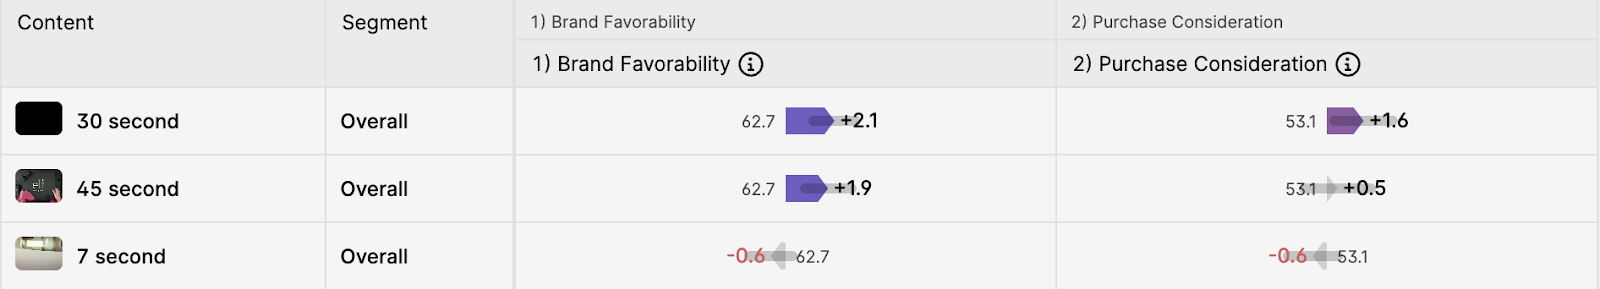 A Swayable dashboard comparing Brand Favorability & Purchase Consideration results for 45, 30, and 7 second ads.